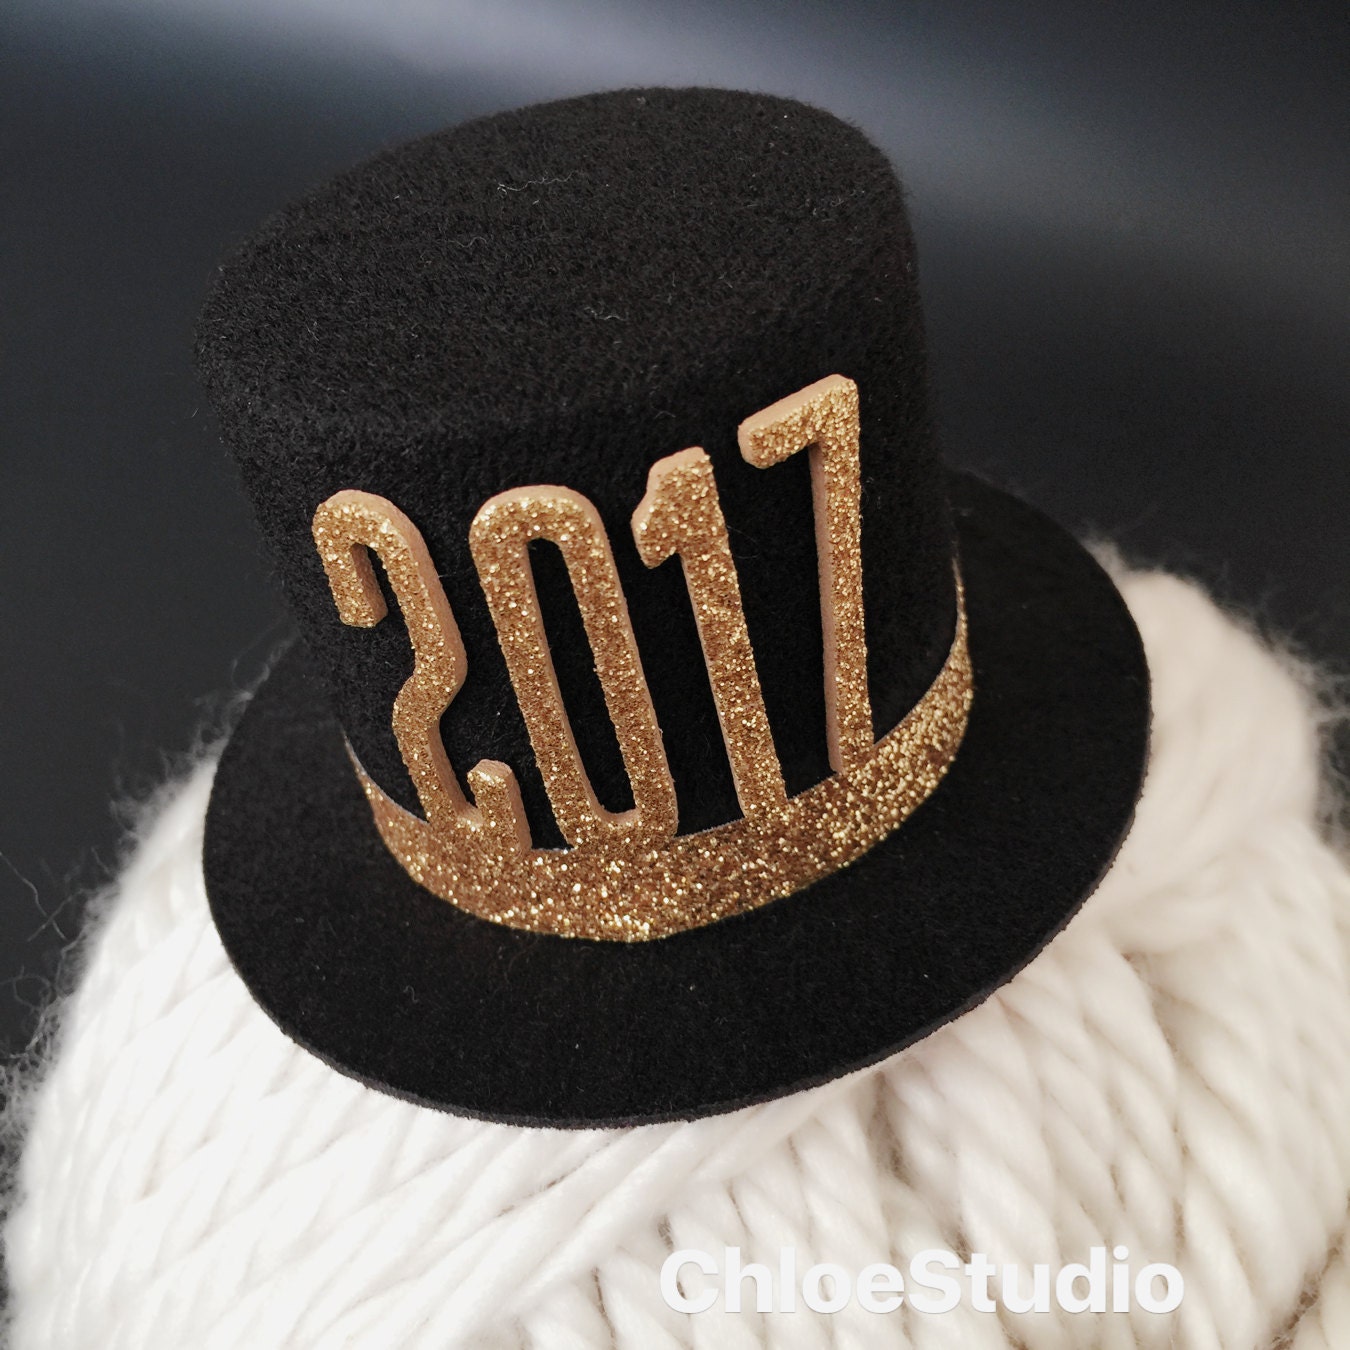 new years top hat clipart - photo #47